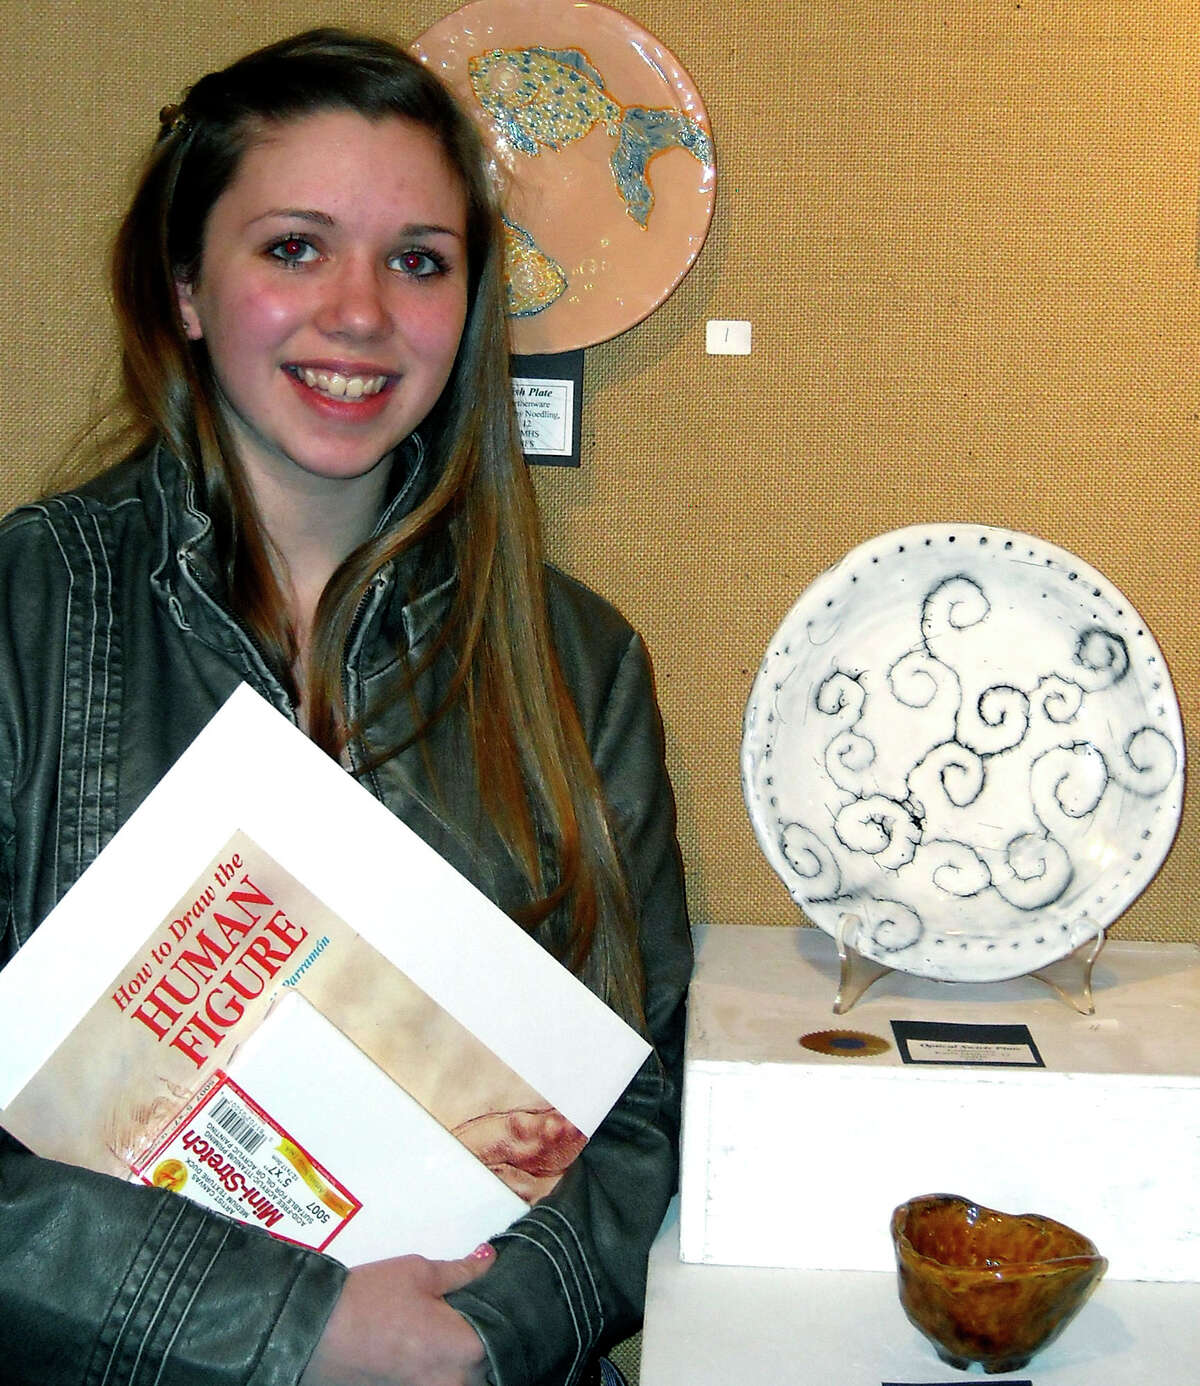 SPECTRUM/Twenty art students from New Milford High School recently participated in the Kent Art Association student show. Two were awarded prizes: senior Kayla Marlowe, above, who won an award for a wax resist plate, and freshman Taryssa Killian for a pastel. Courtesy of New Milford High School